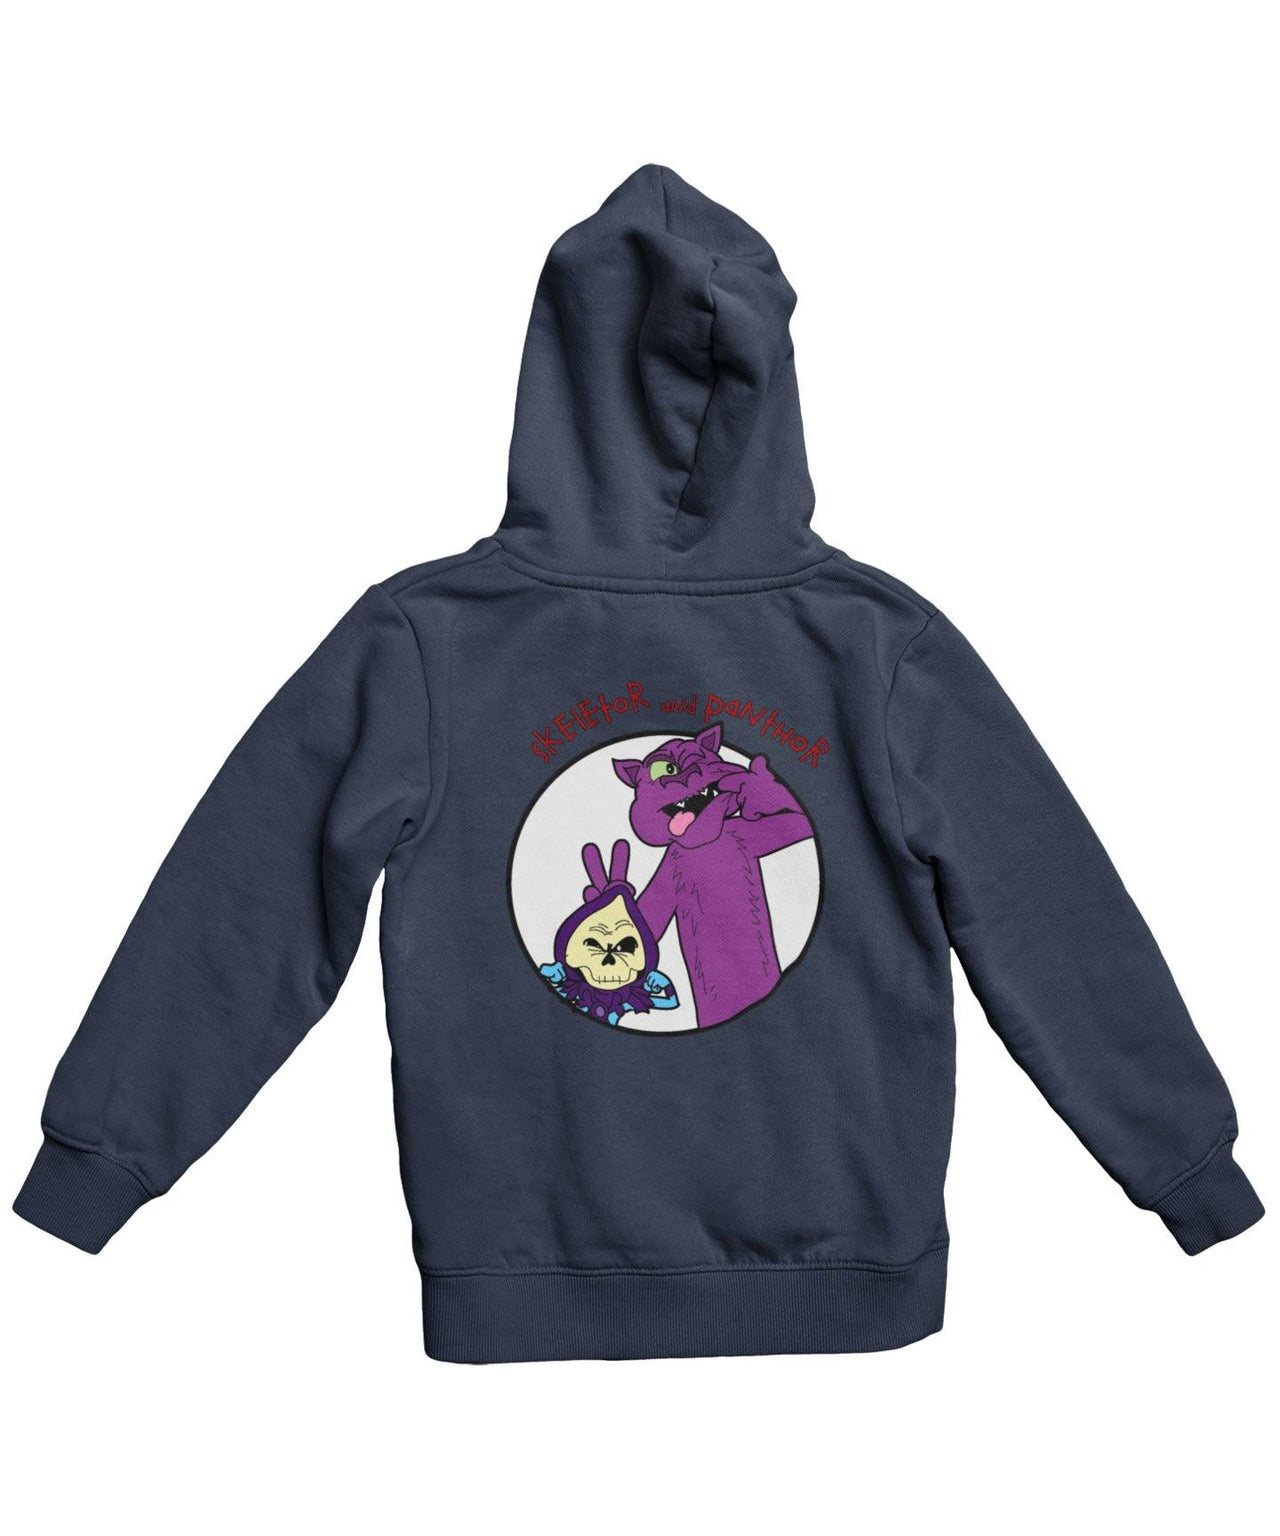 Top Notchy Skeletor and Panther Back Printed Unisex Hoodie 8Ball